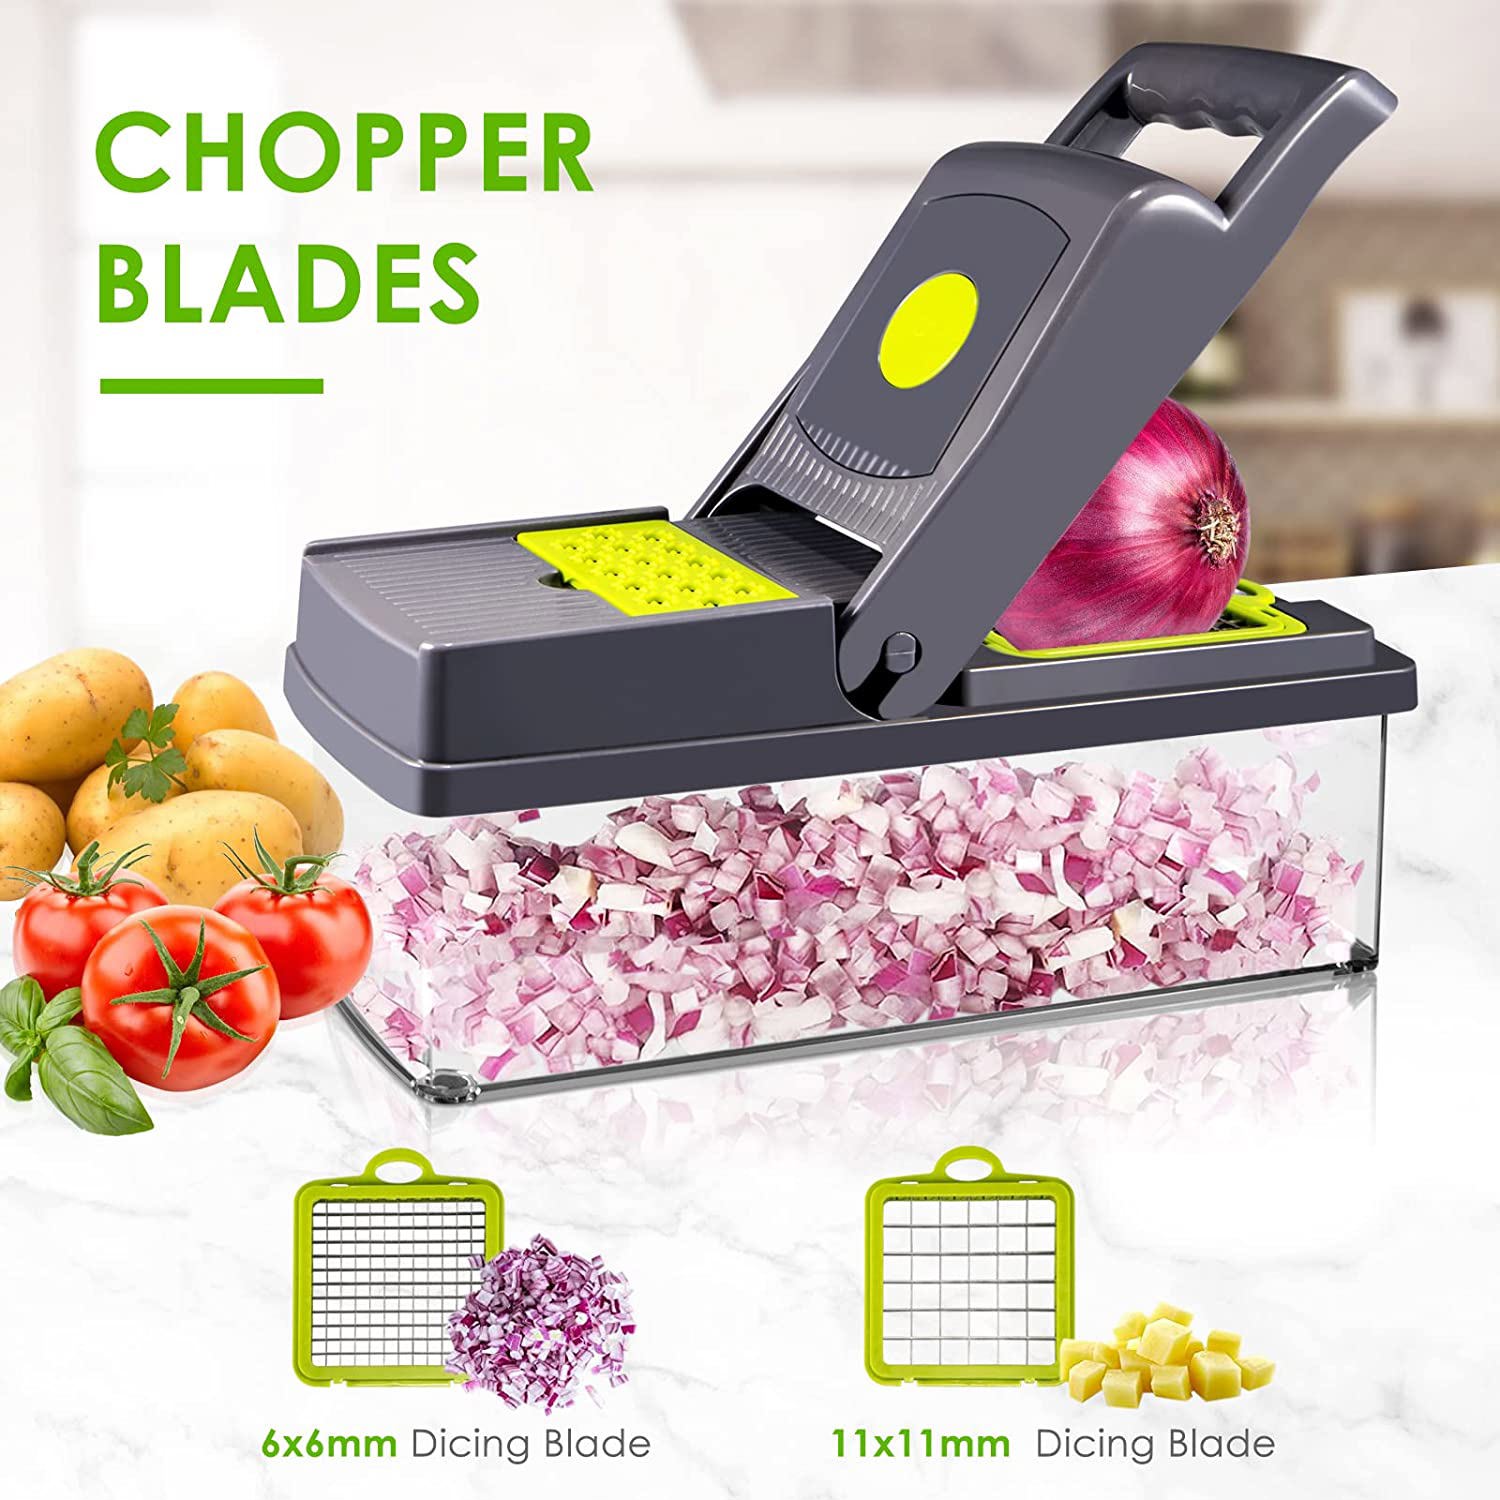 Vegetable Chopper,Pro Veggie Cutter Onion Chopper Potato Chopper,Newly  Upgraded Food Chopper with Cleaning PUSH Button,Large Capacity Container,8  Blades,Hand Guard